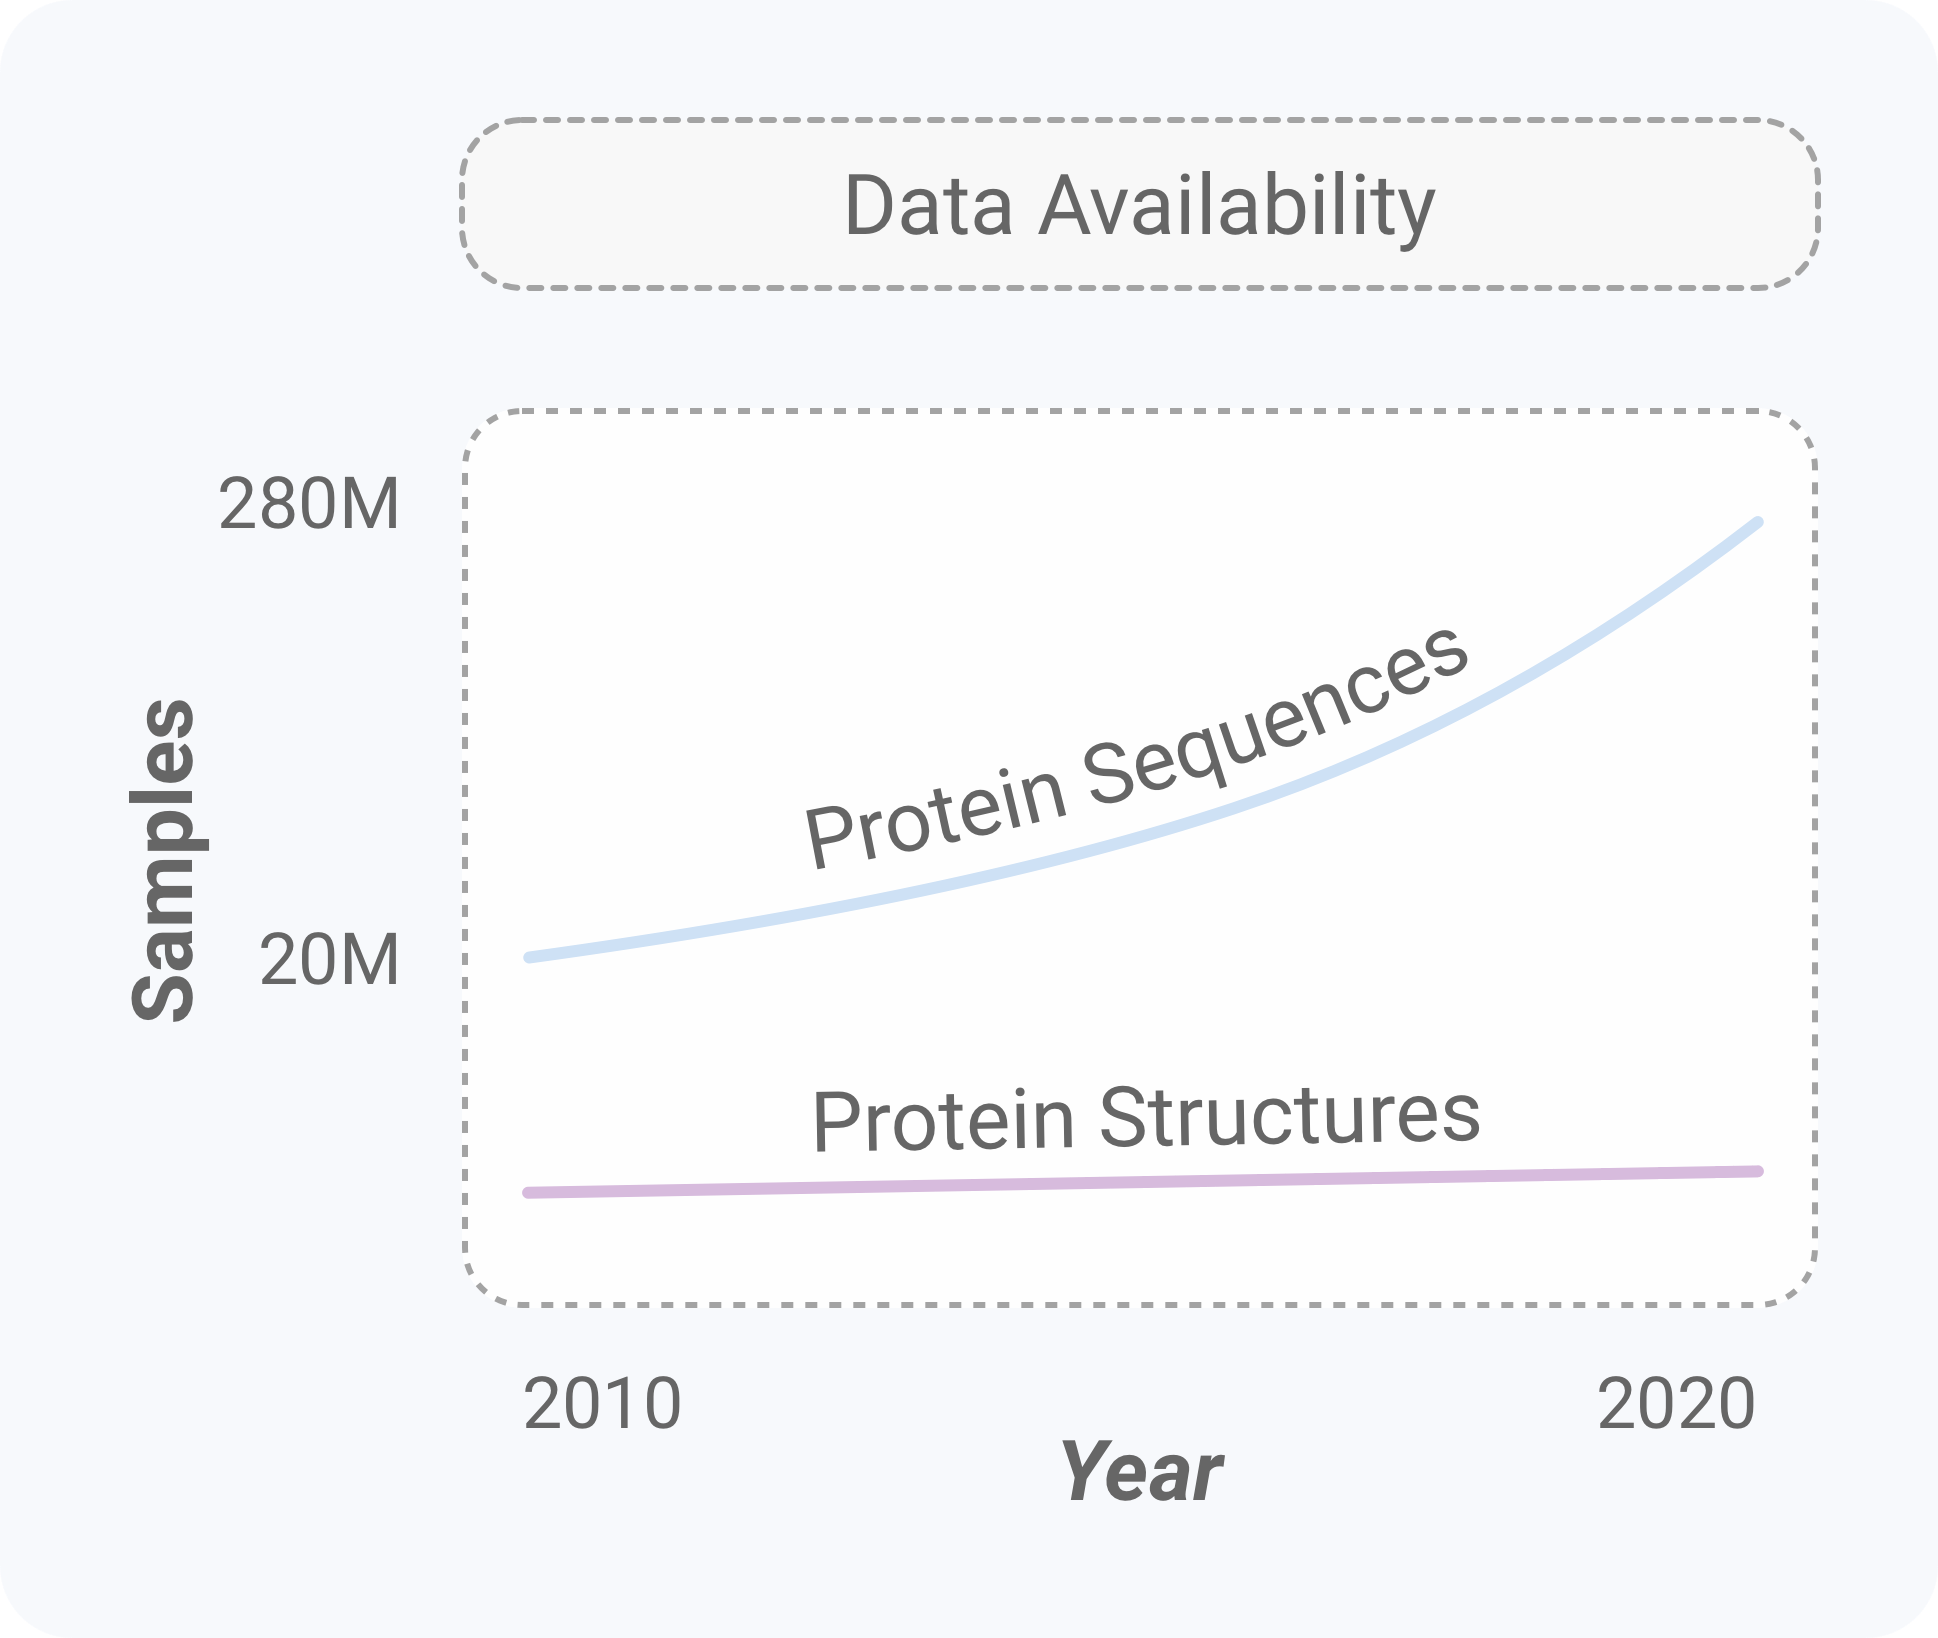 ProGen: Using AI to Generate Proteins